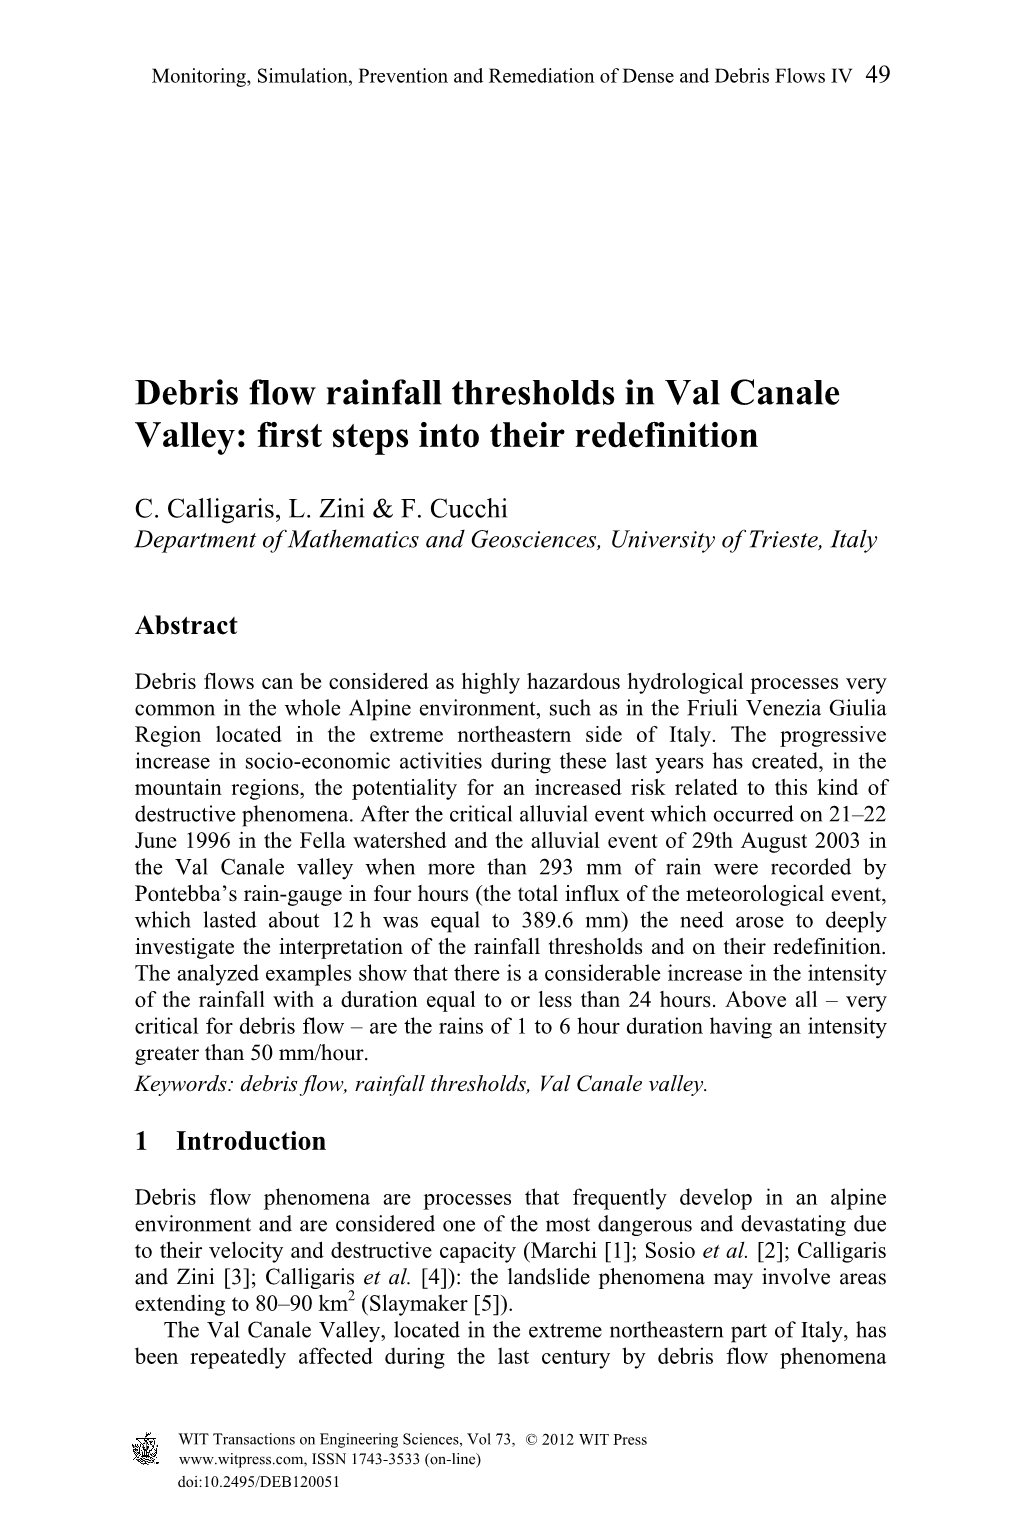 Debris Flow Rainfall Thresholds in Val Canale Valley: First Steps Into Their Redefinition